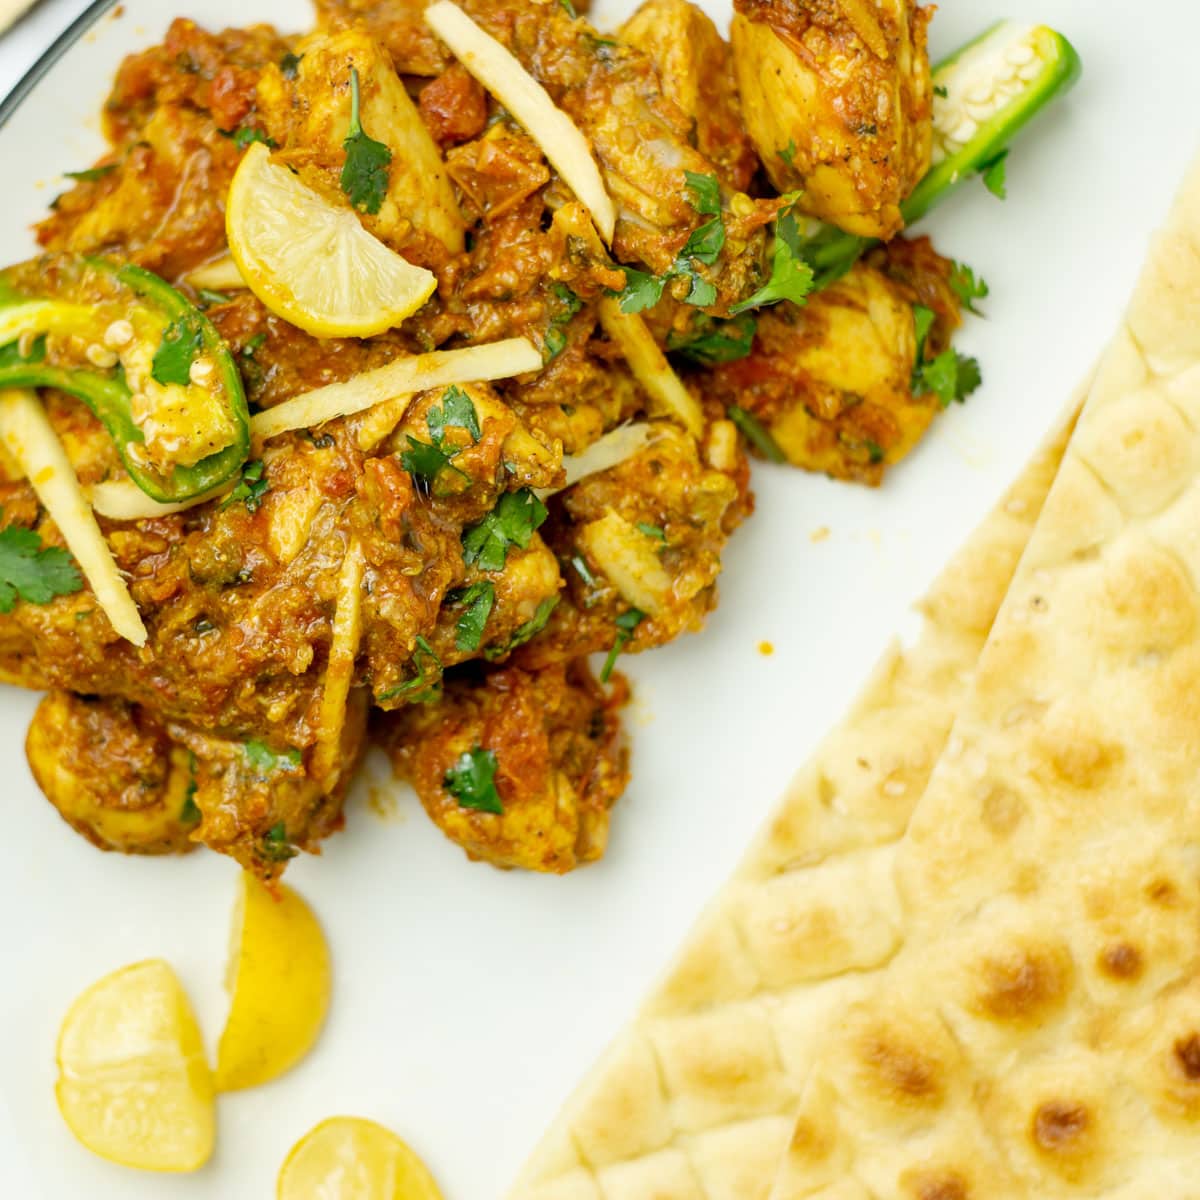 Chicken Karahi with green chili in a plate